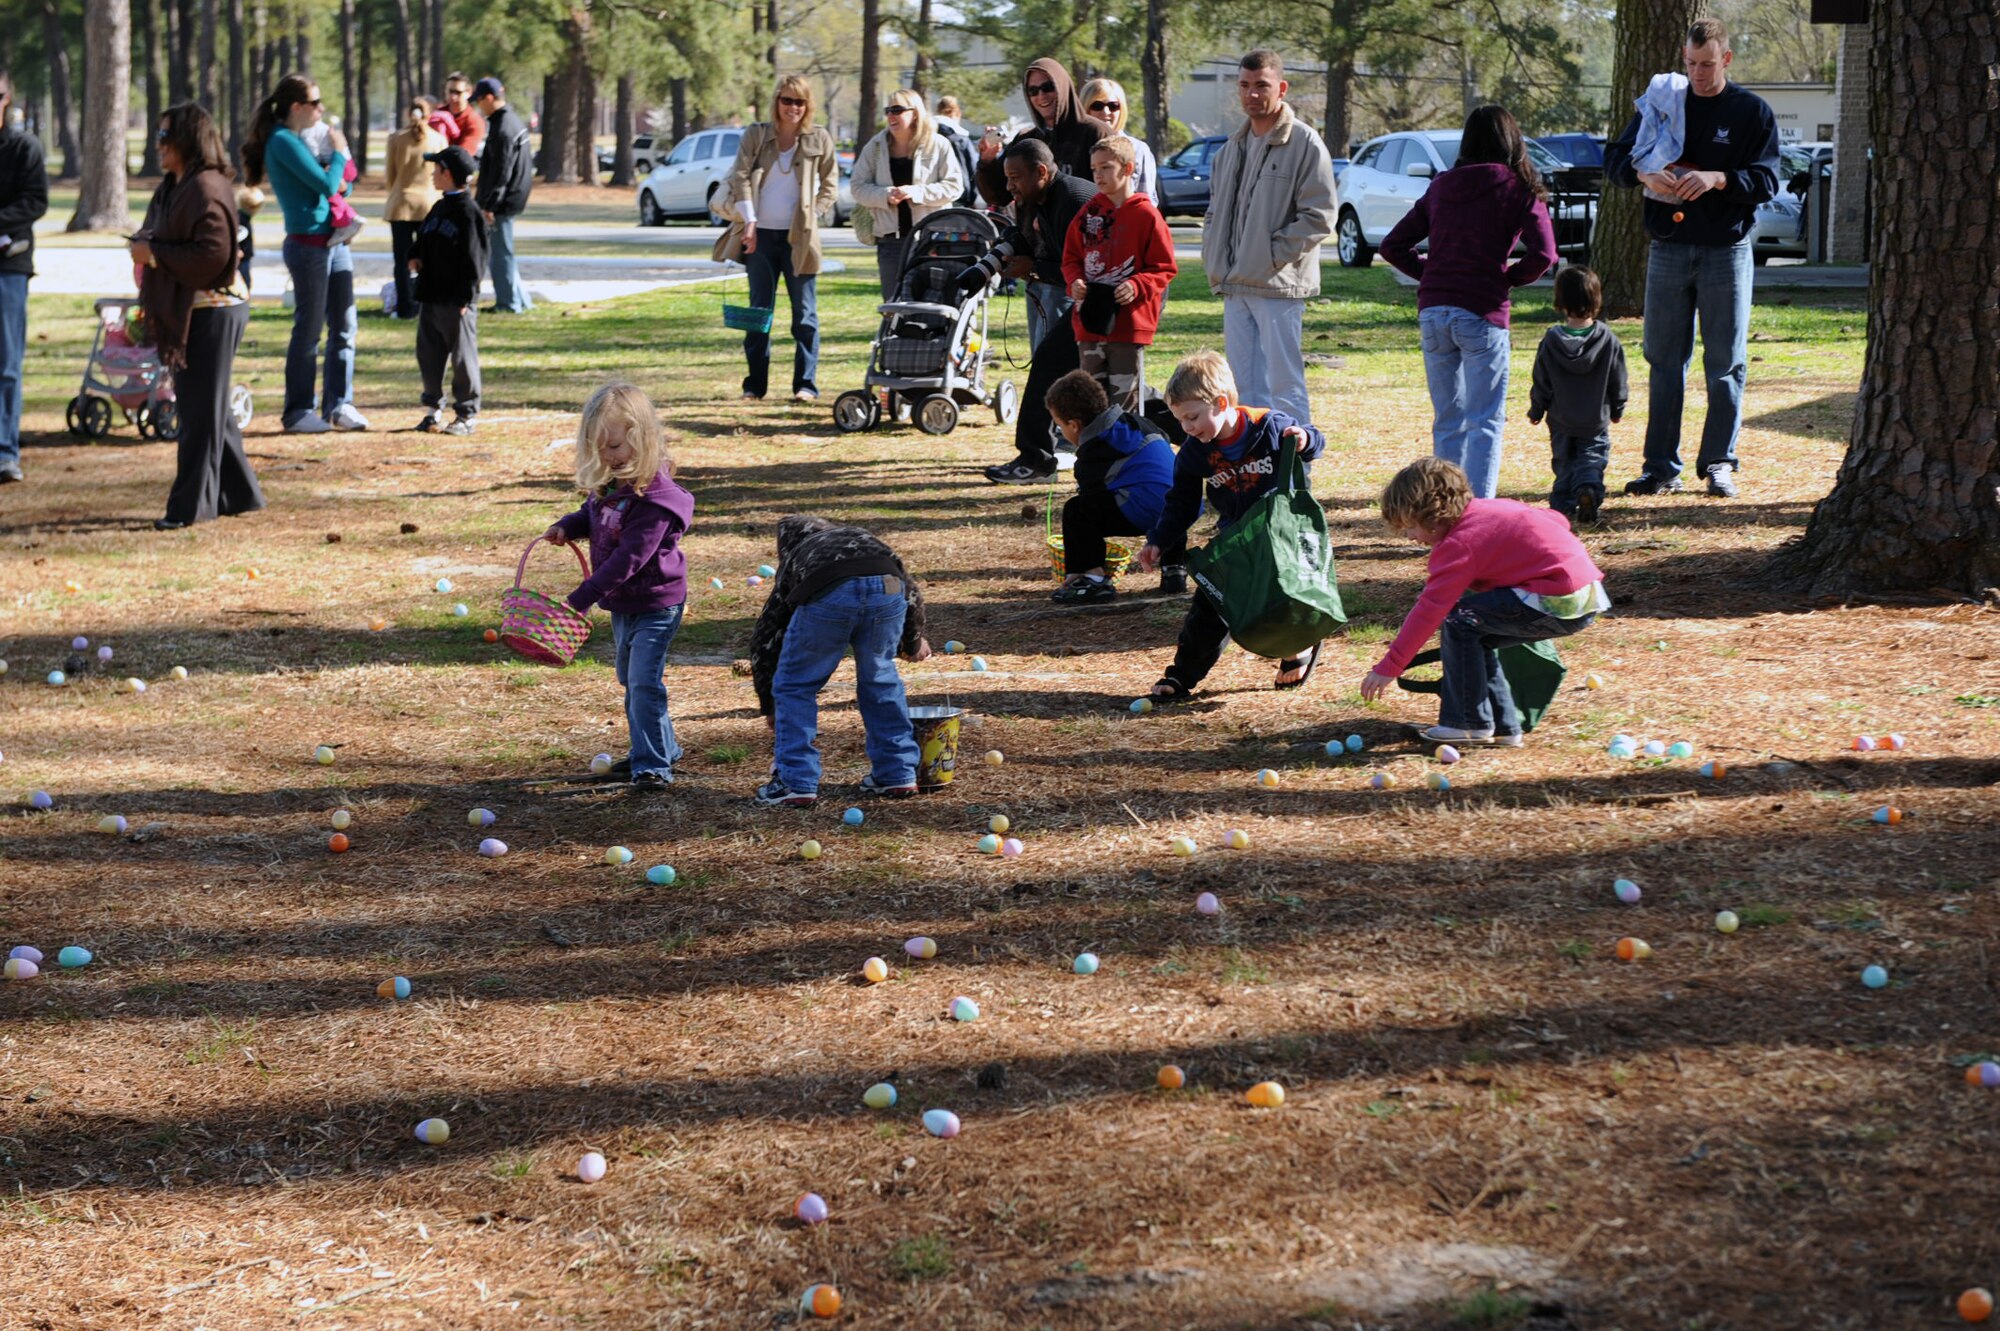 Base youth race to collect Easter eggs at Debden Park on Seymour Johnson Air Force Base, N.C., March 27, 2010. The Easter egg hunt is one of many base events sponsored by the Airman & Family Readiness Center as part of the DePLAYment tag pass program. The DePLAYment program offers family members of deployed Airmen free or discounted entry into events on and off base. (U.S. Air Force photo/Senior Airman Ciara Wymbs) 